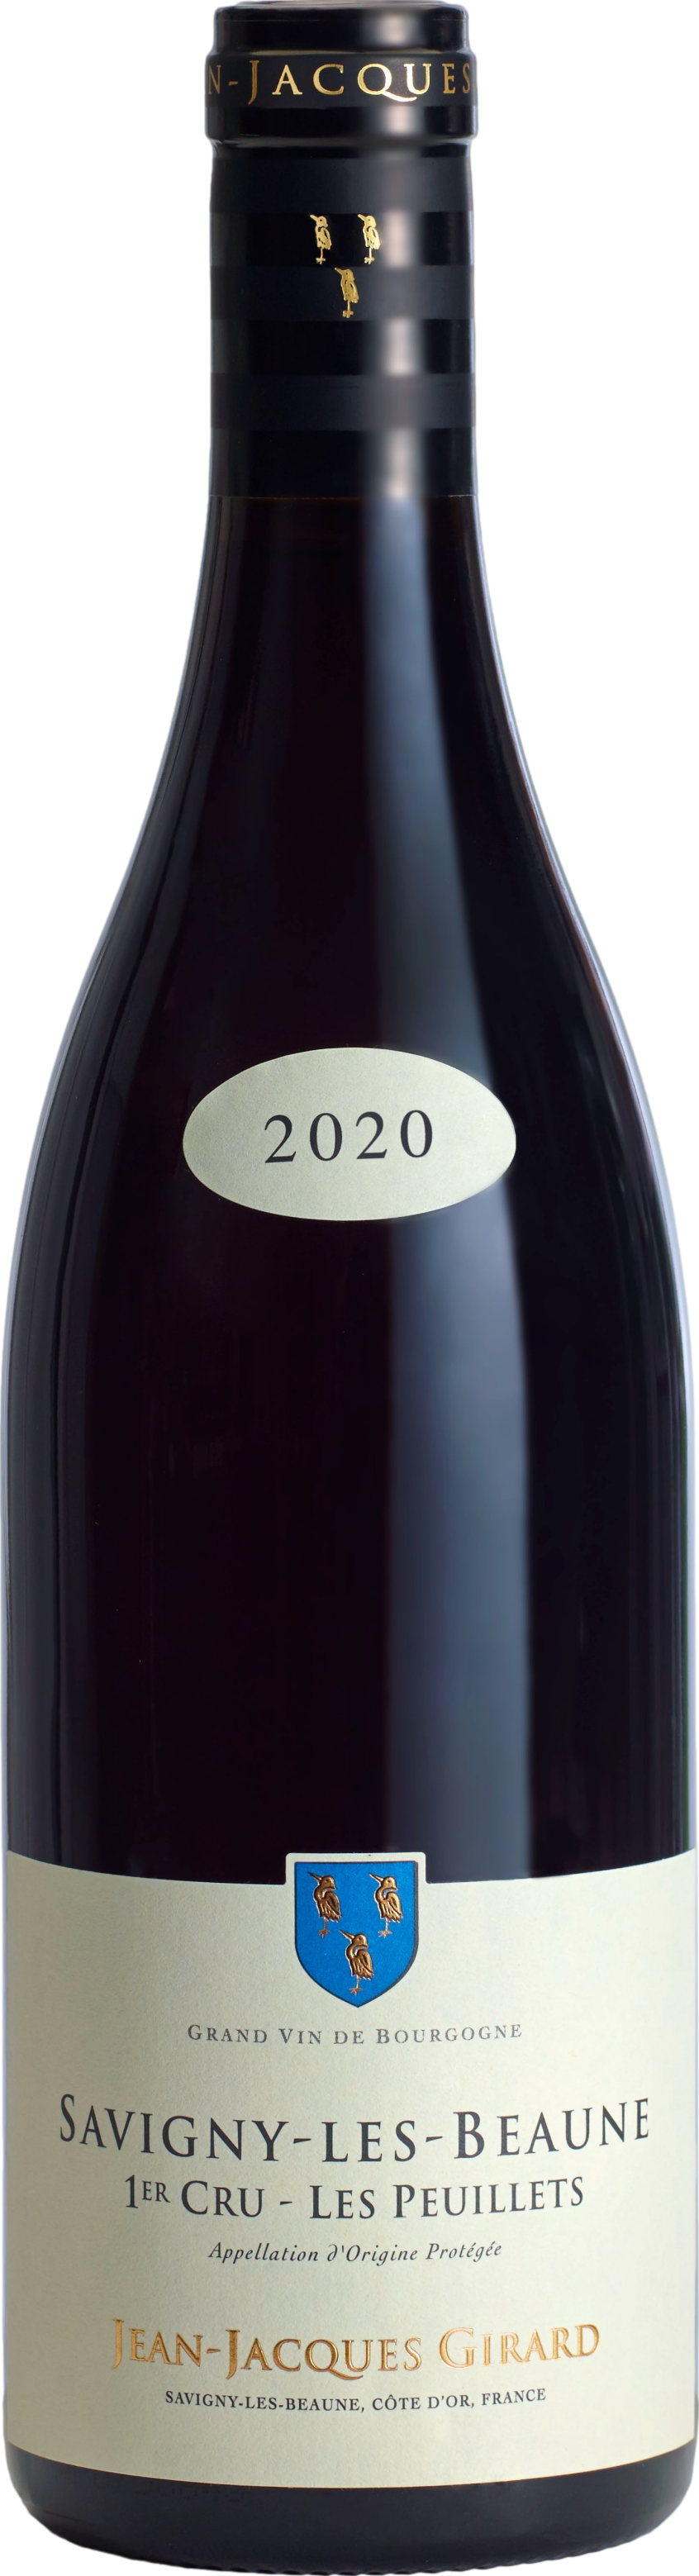 Domaine Jean-Jacques Girard Savigny les Beaune Premier Cru Les Peuillets 2020 Domaine Jean-Jacques Girard 8wines DACH